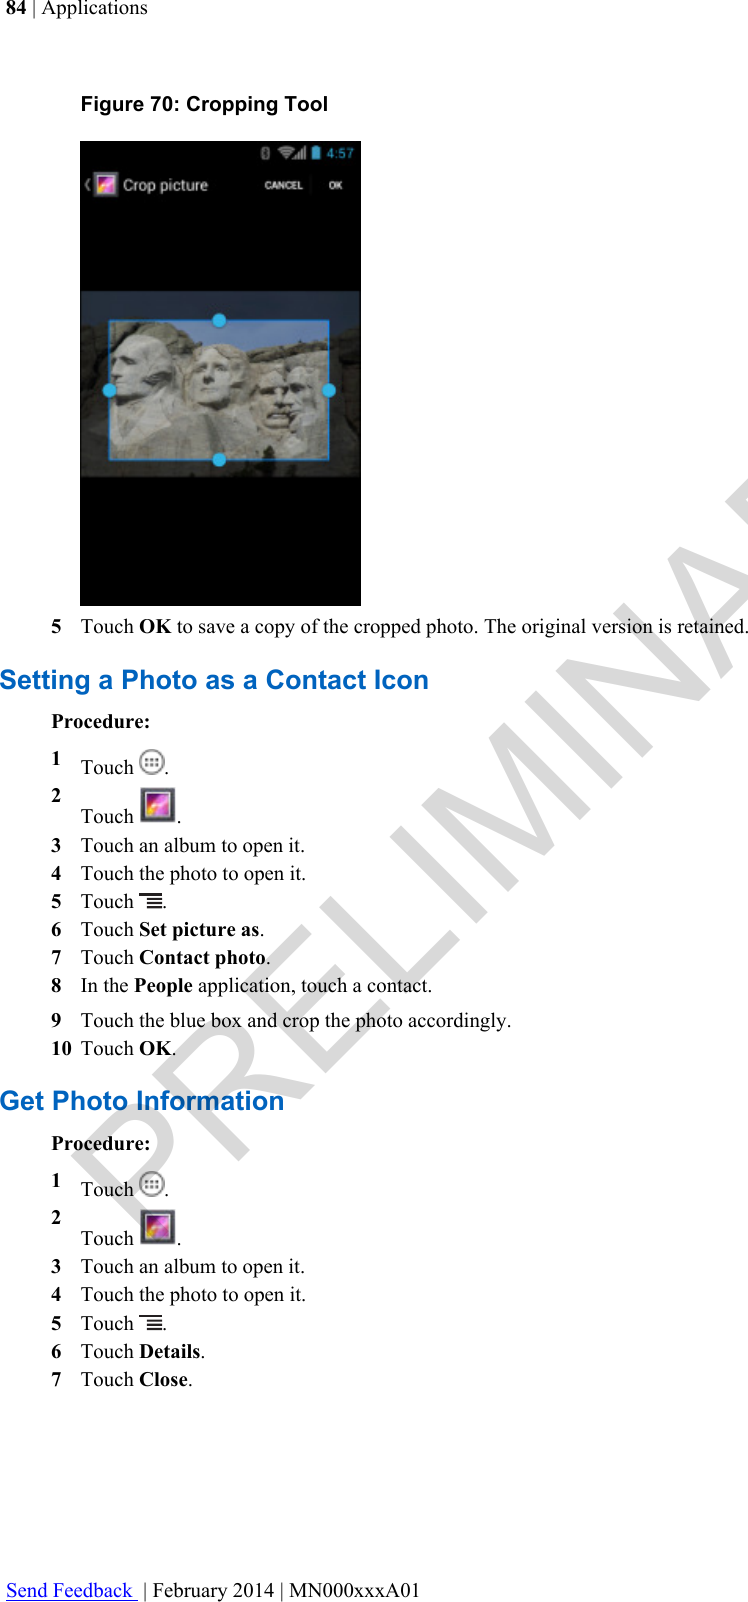 Figure 70: Cropping Tool5Touch OK to save a copy of the cropped photo. The original version is retained.Setting a Photo as a Contact IconProcedure:1Touch  .2Touch  .3Touch an album to open it.4Touch the photo to open it.5Touch  .6Touch Set picture as.7Touch Contact photo.8In the People application, touch a contact.9Touch the blue box and crop the photo accordingly.10 Touch OK.Get Photo InformationProcedure:1Touch  .2Touch  .3Touch an album to open it.4Touch the photo to open it.5Touch  .6Touch Details.7Touch Close.84 | ApplicationsSend Feedback  | February 2014 | MN000xxxA01PRELIMINARY